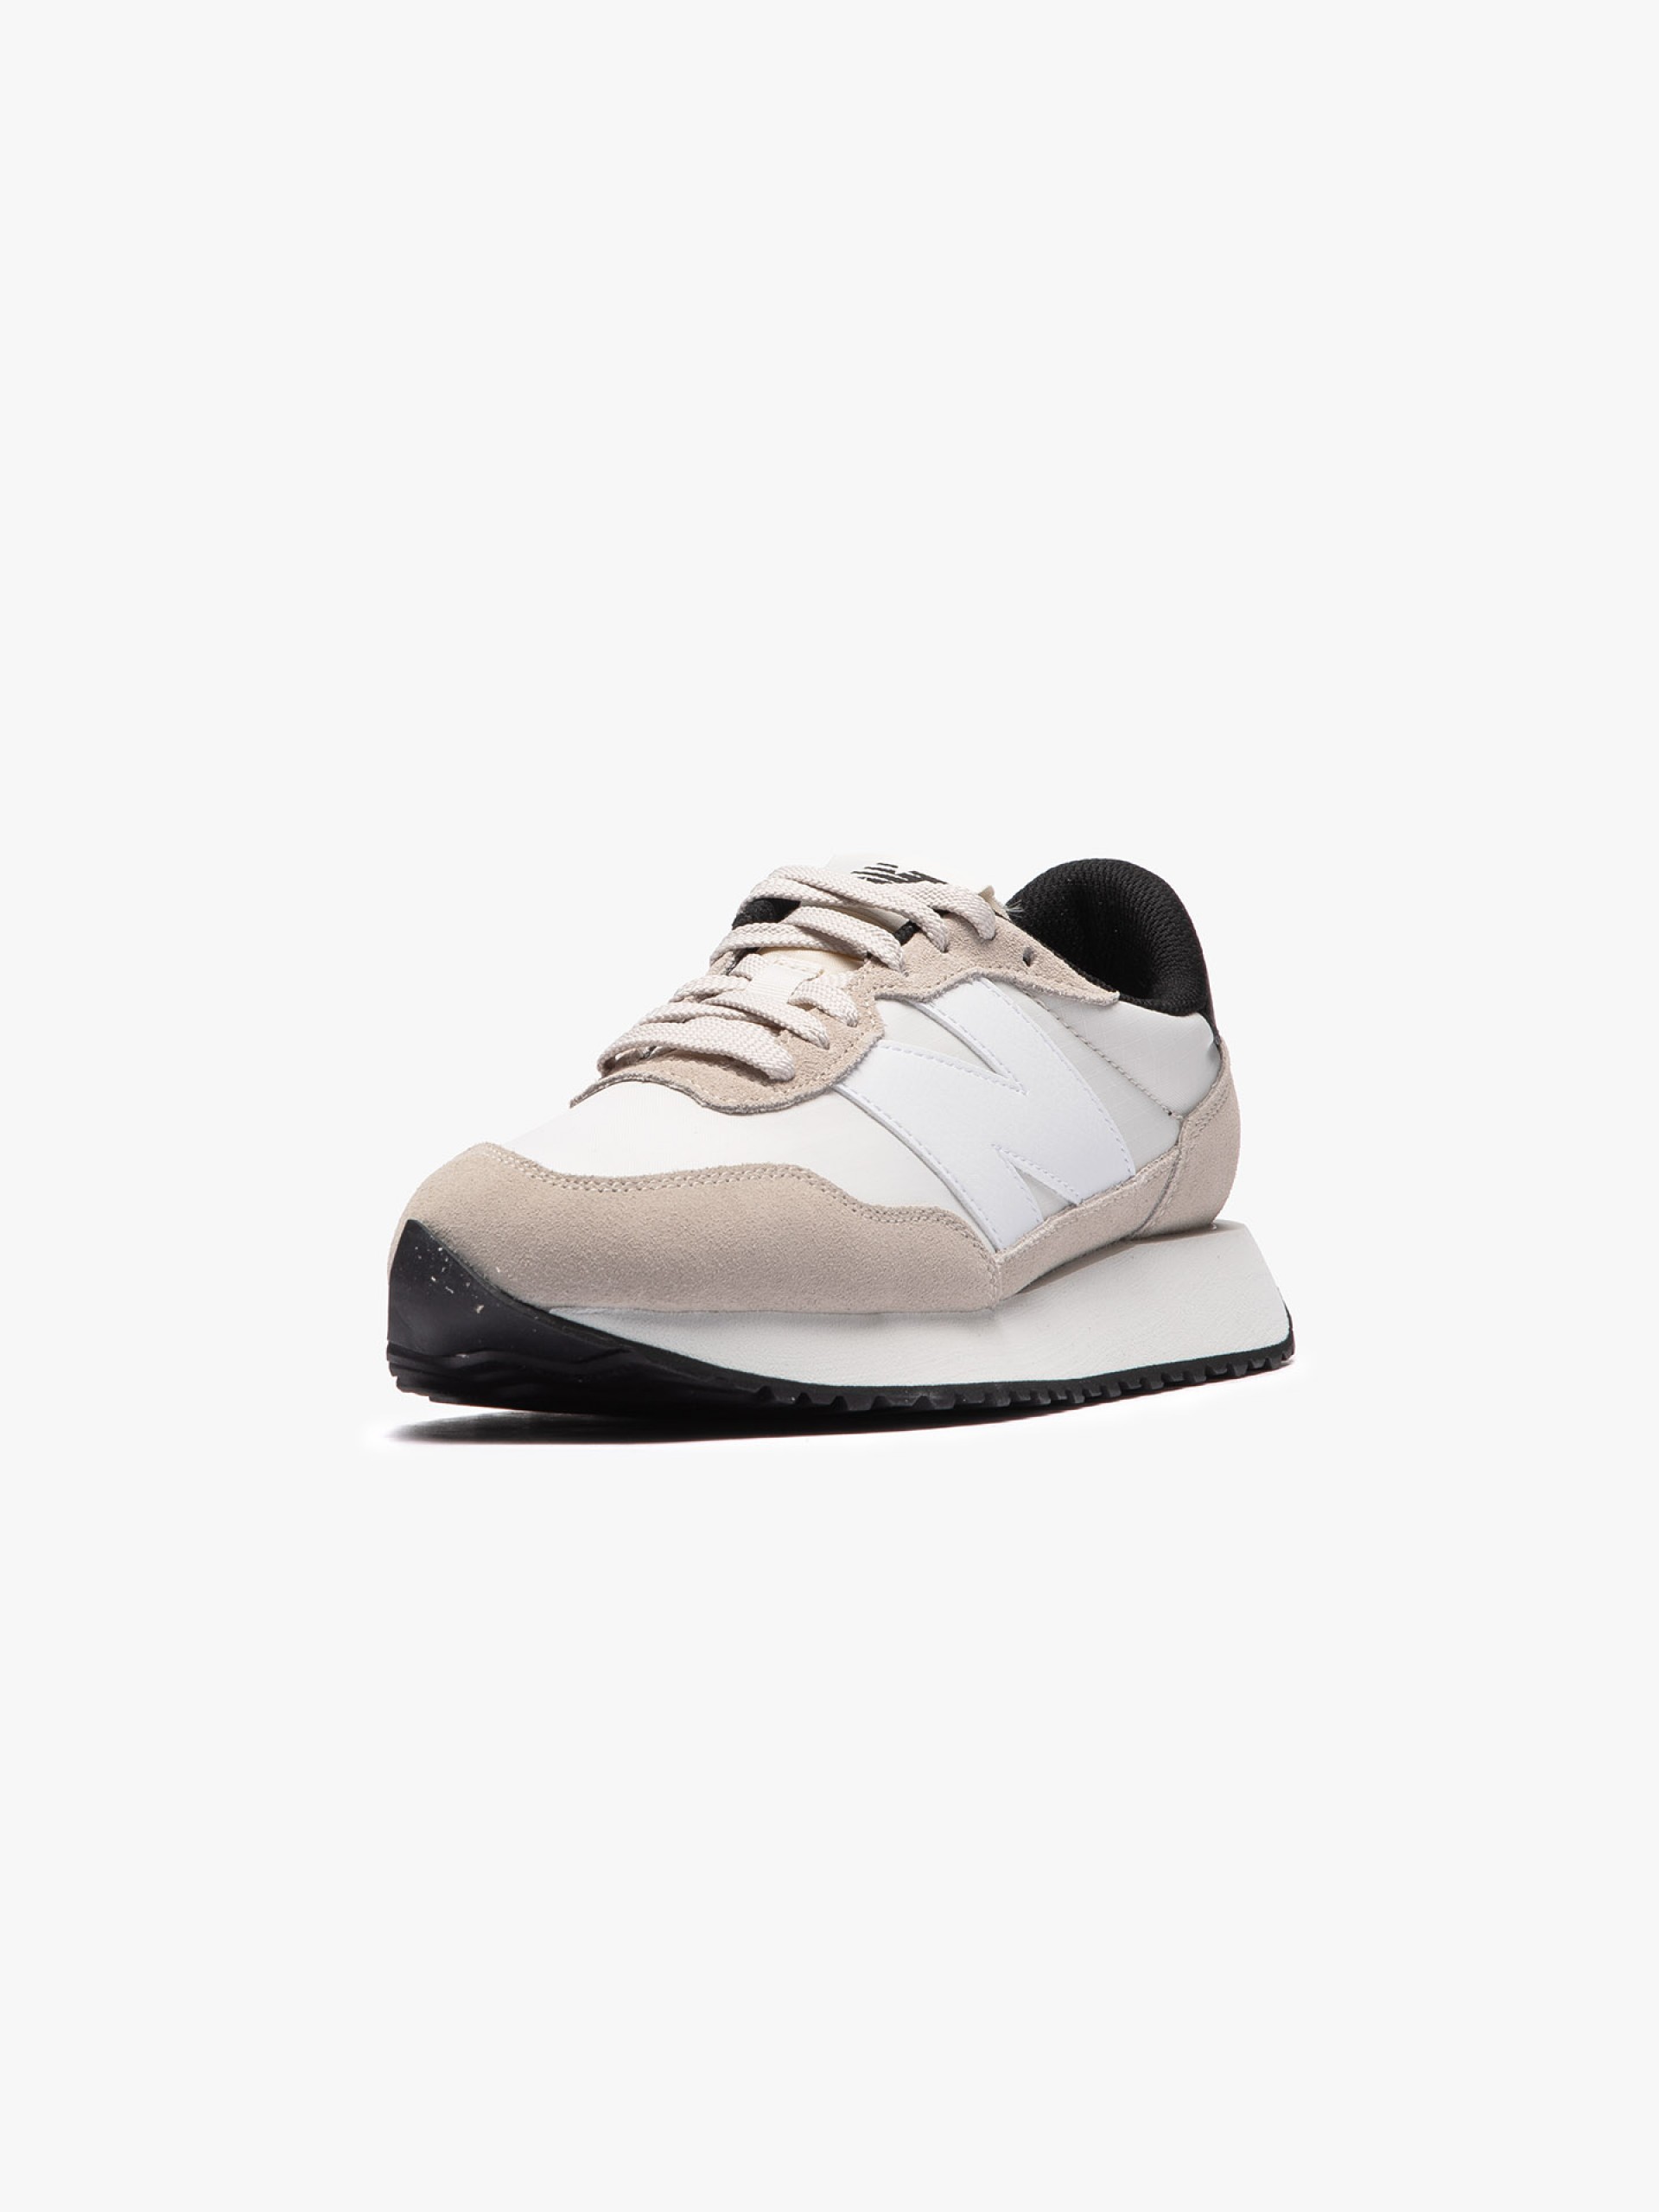 New Balance MS237 Ultra Luxe | VEIN STORE